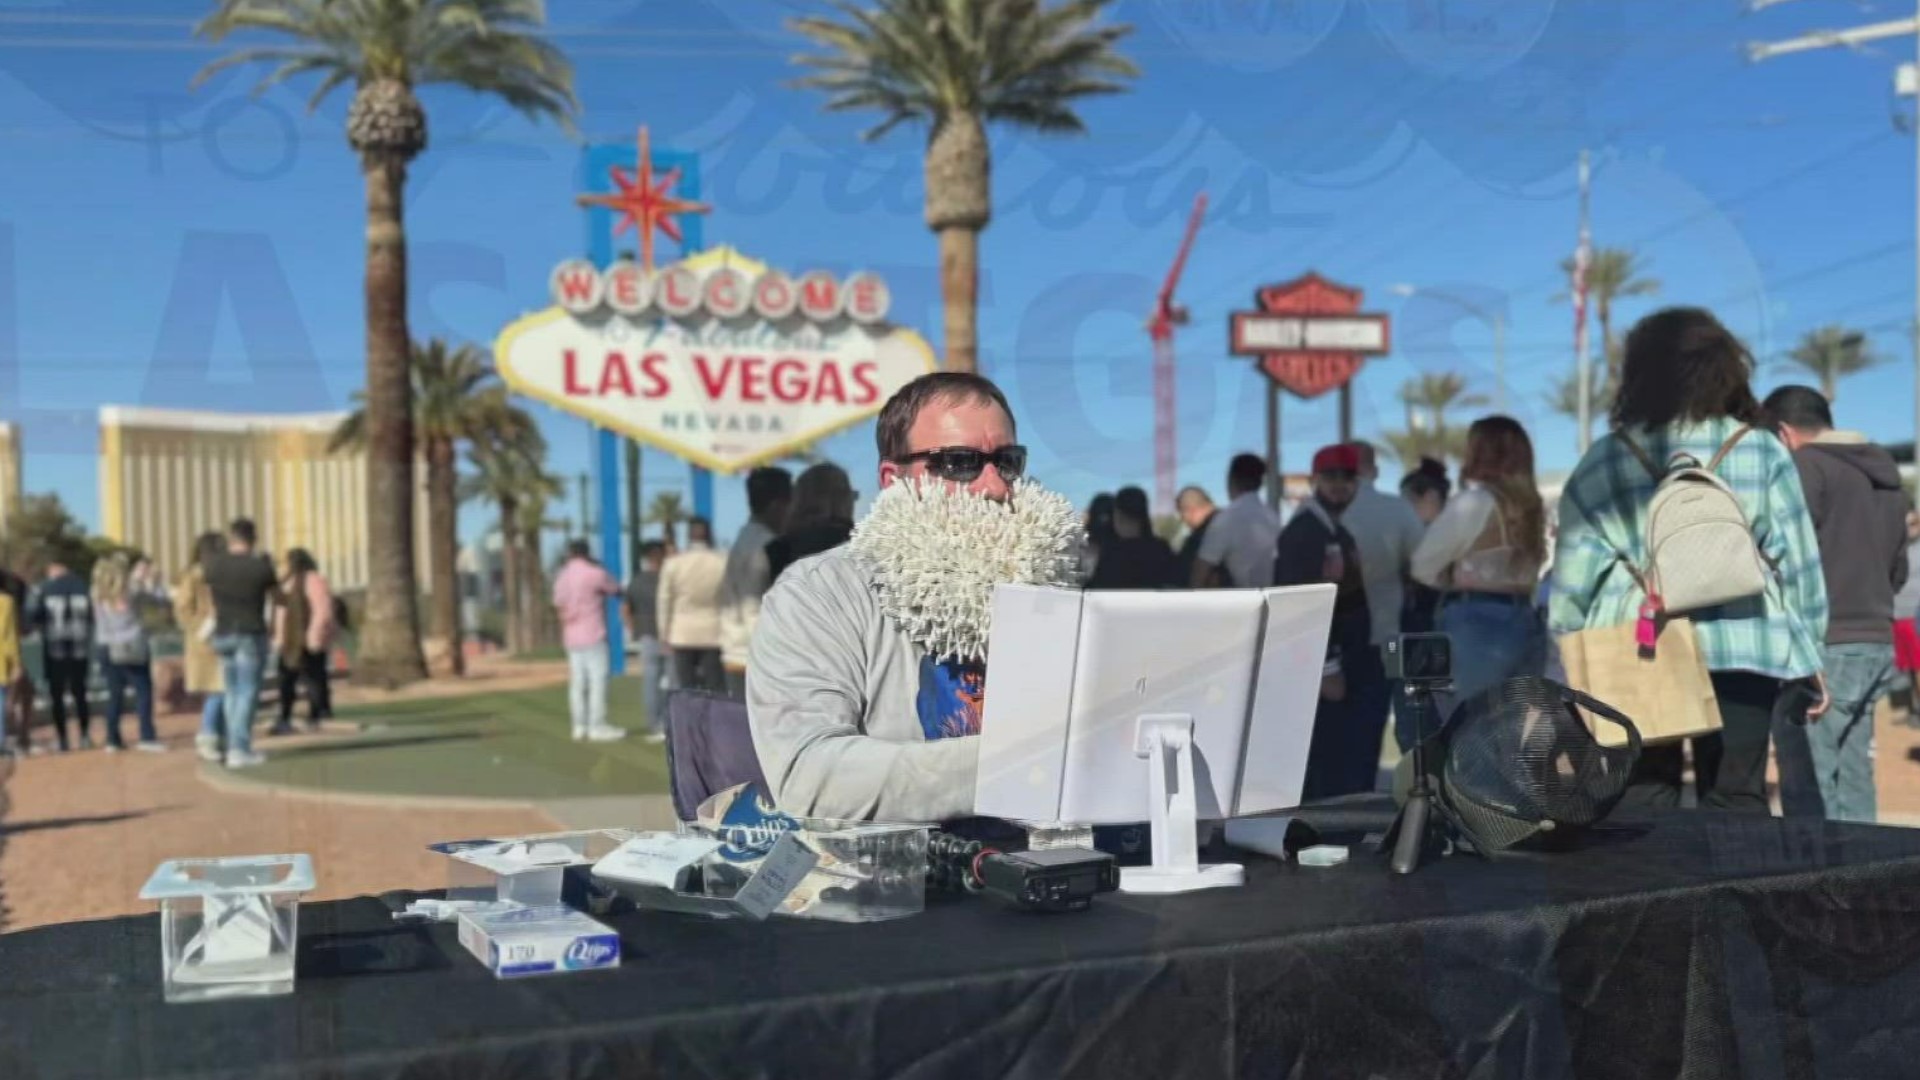 Joel Strasser recently set another world record with his beard. After putting the most pencils in his facial hair in 2021, he took it up a notch with Q-tips.